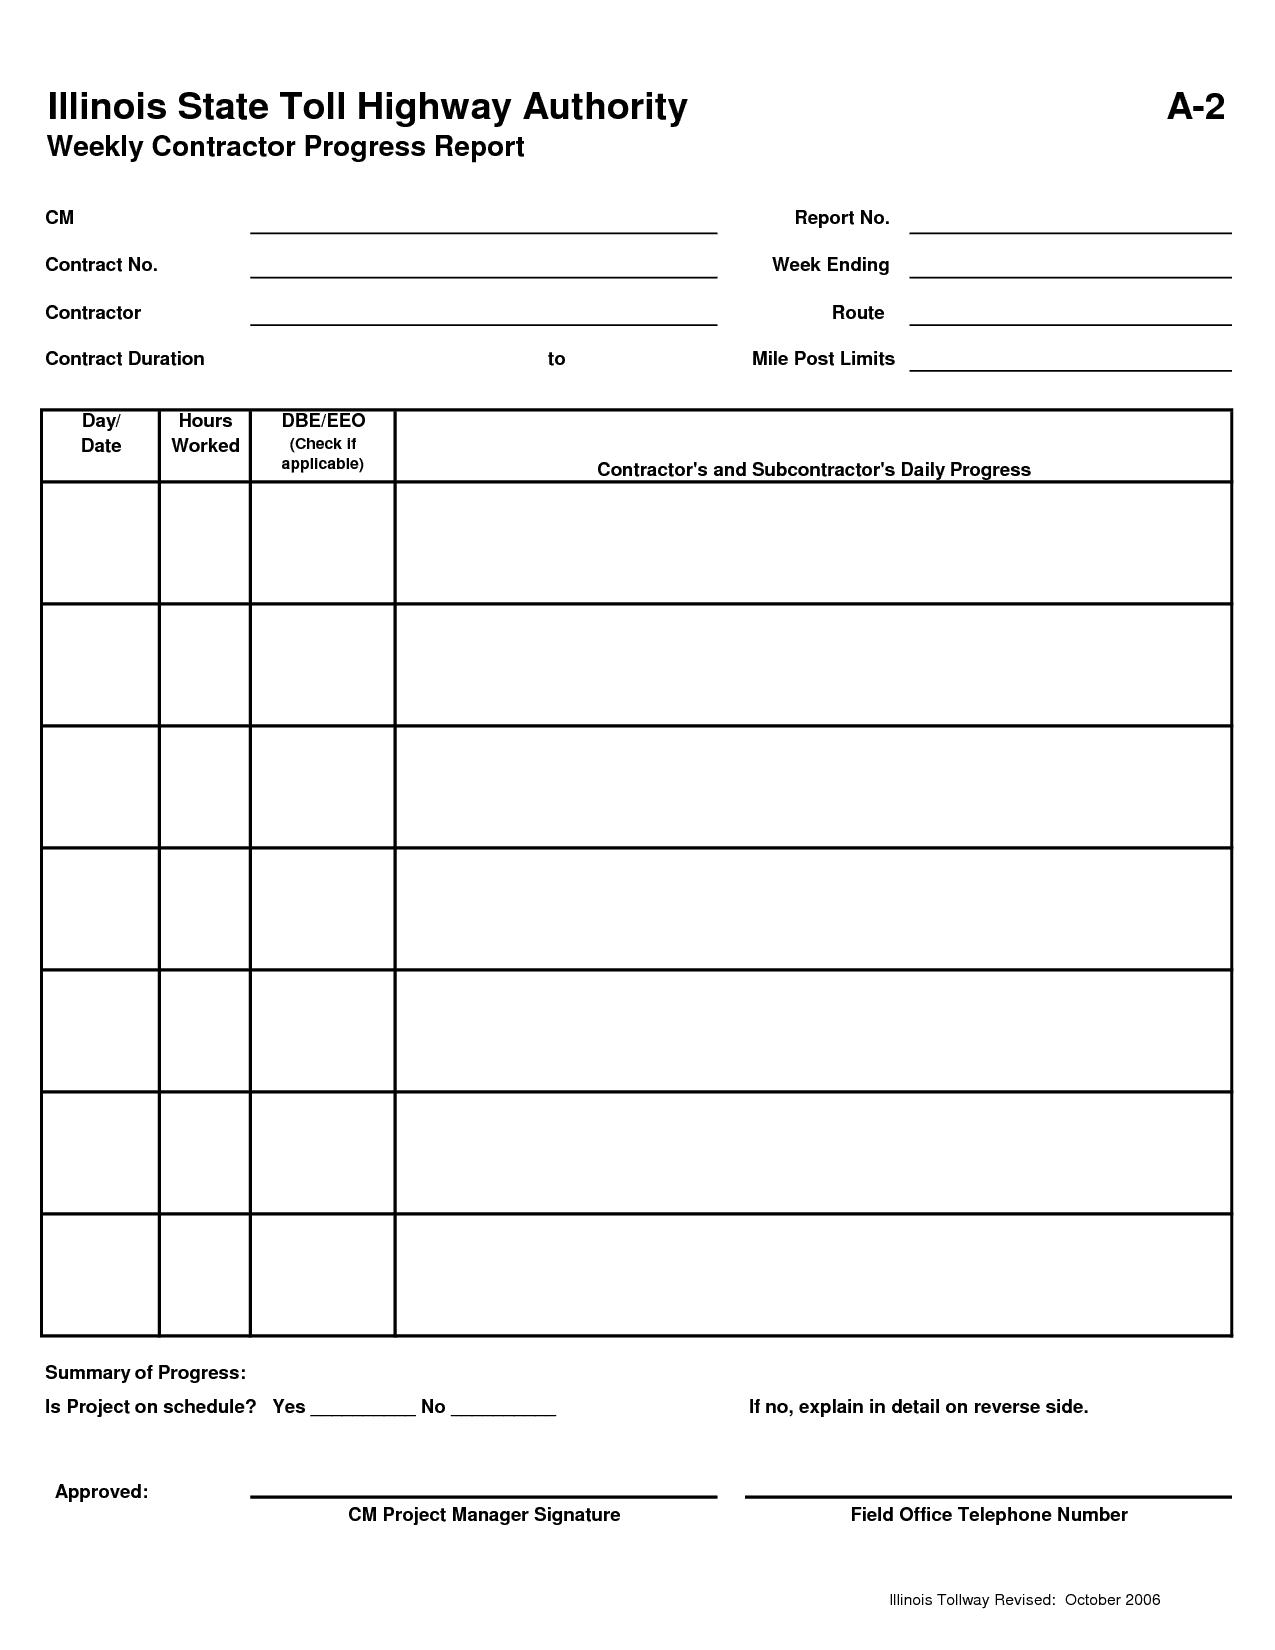 Bookkeeping Eadsheet For Small Business And Gas Station Within Daily Report Sheet Template